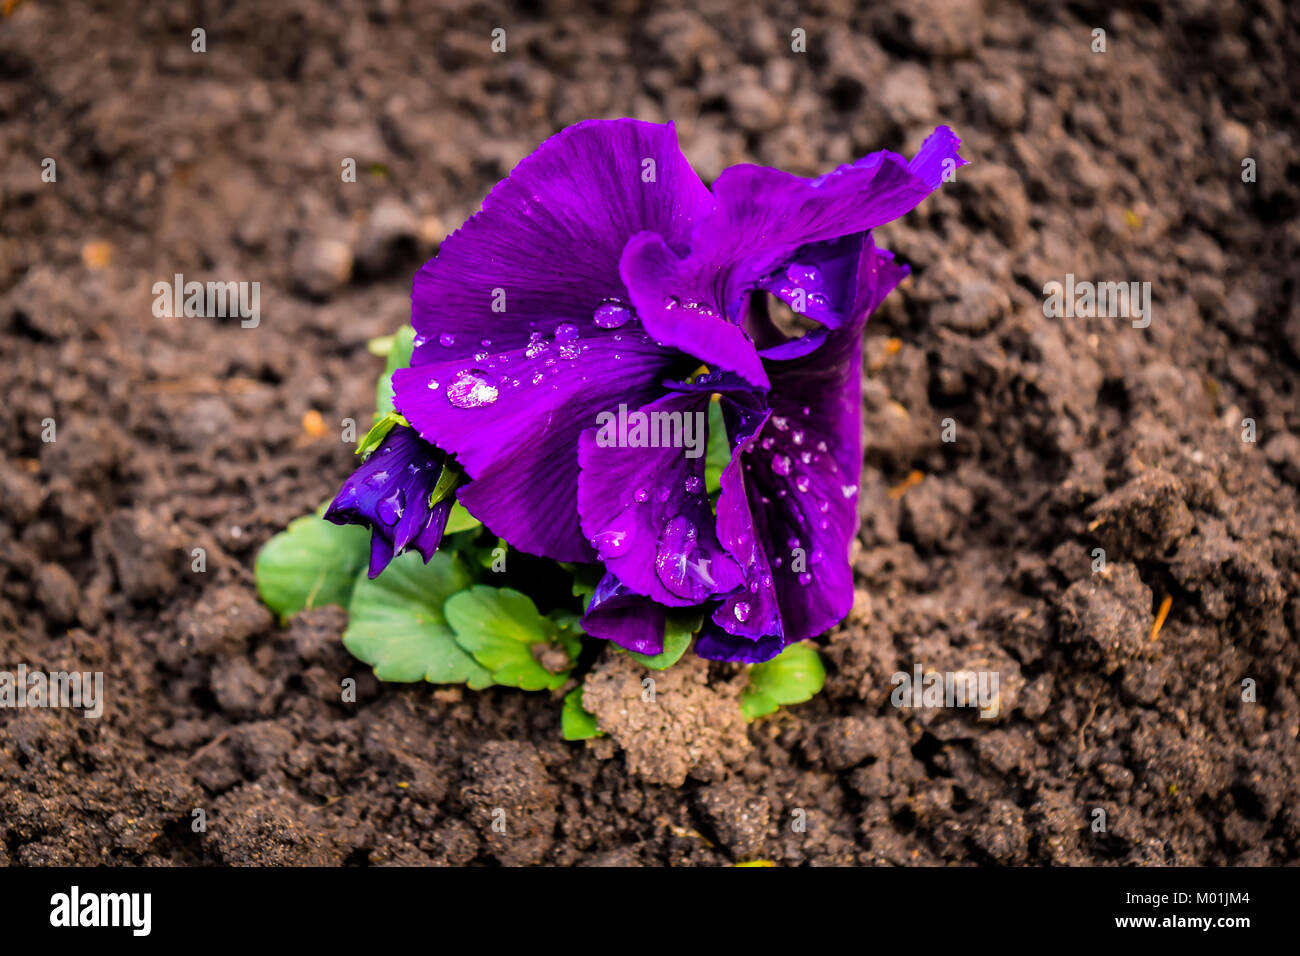 Lonely little violet flower with water drops, after rain. Purple flower grows in brown soil. Stock Photo